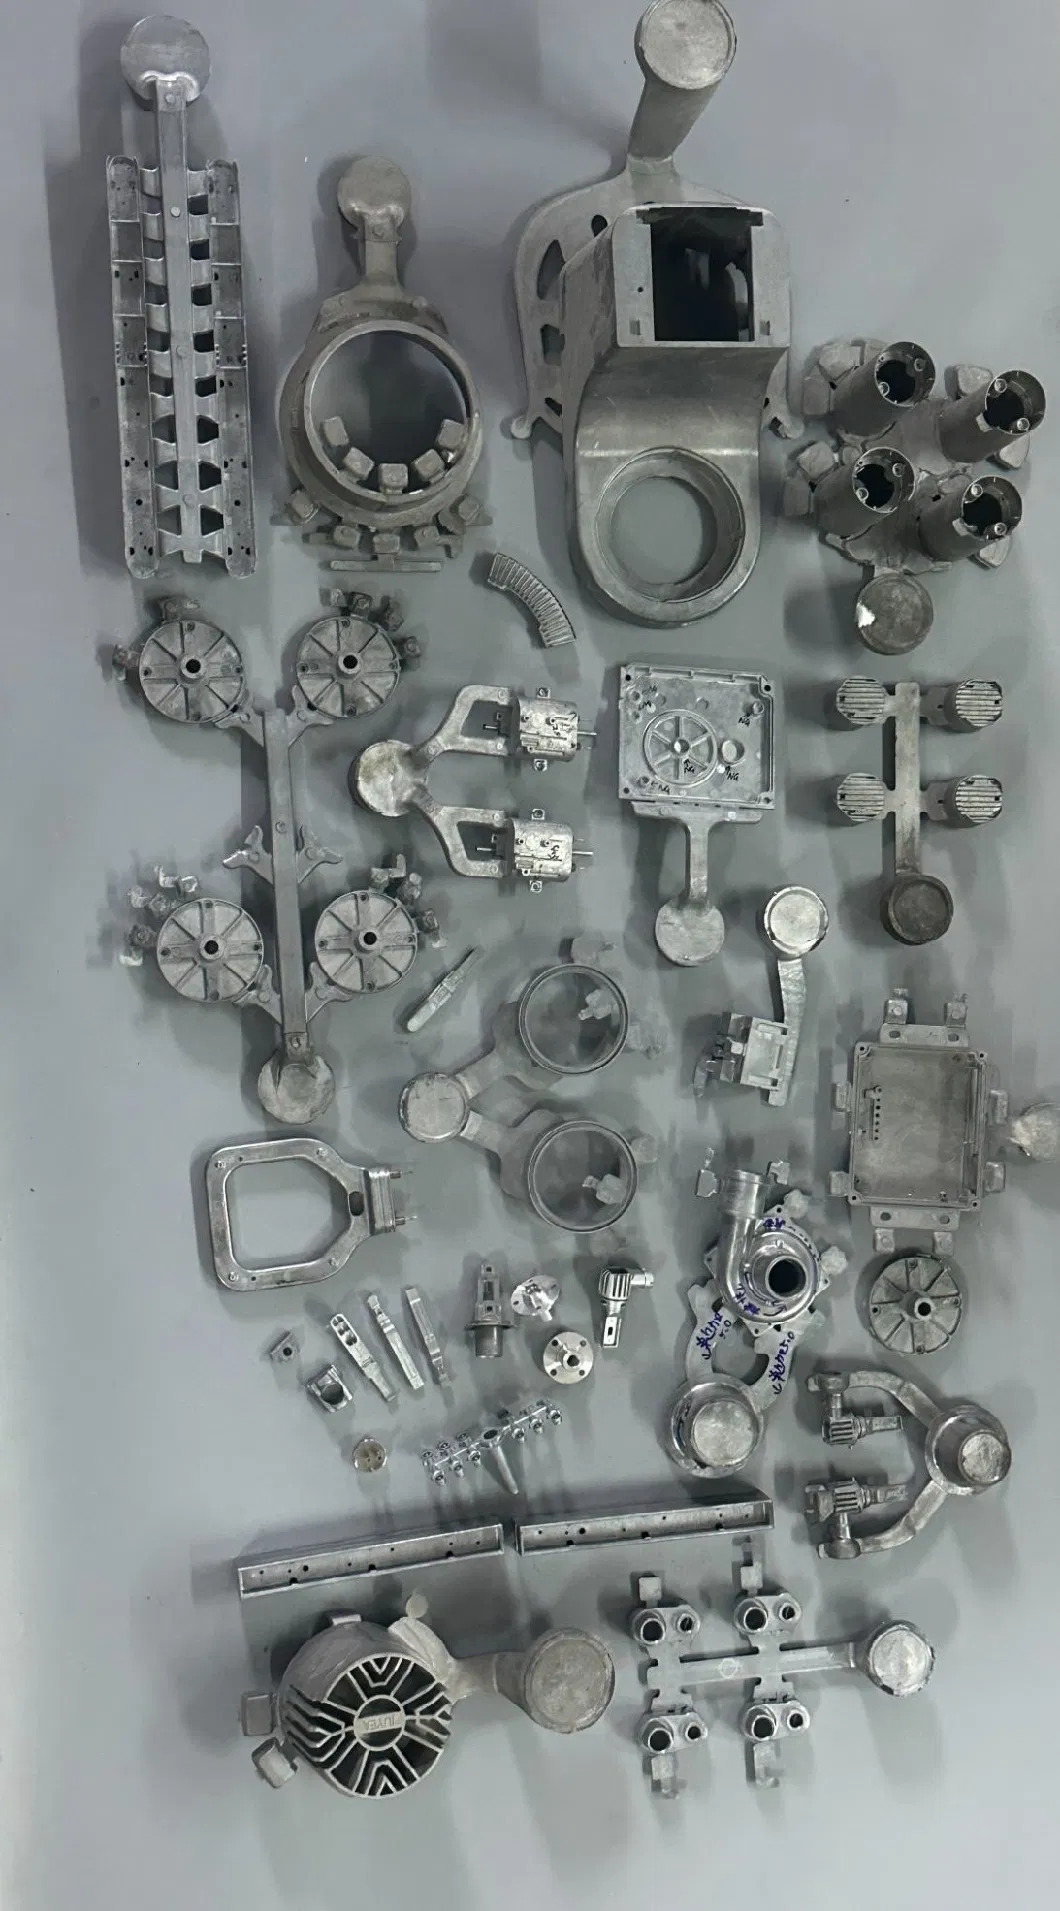 OEM Customized Fitting Prototype Design Drawing Machine Parts Cheaper Price Mould